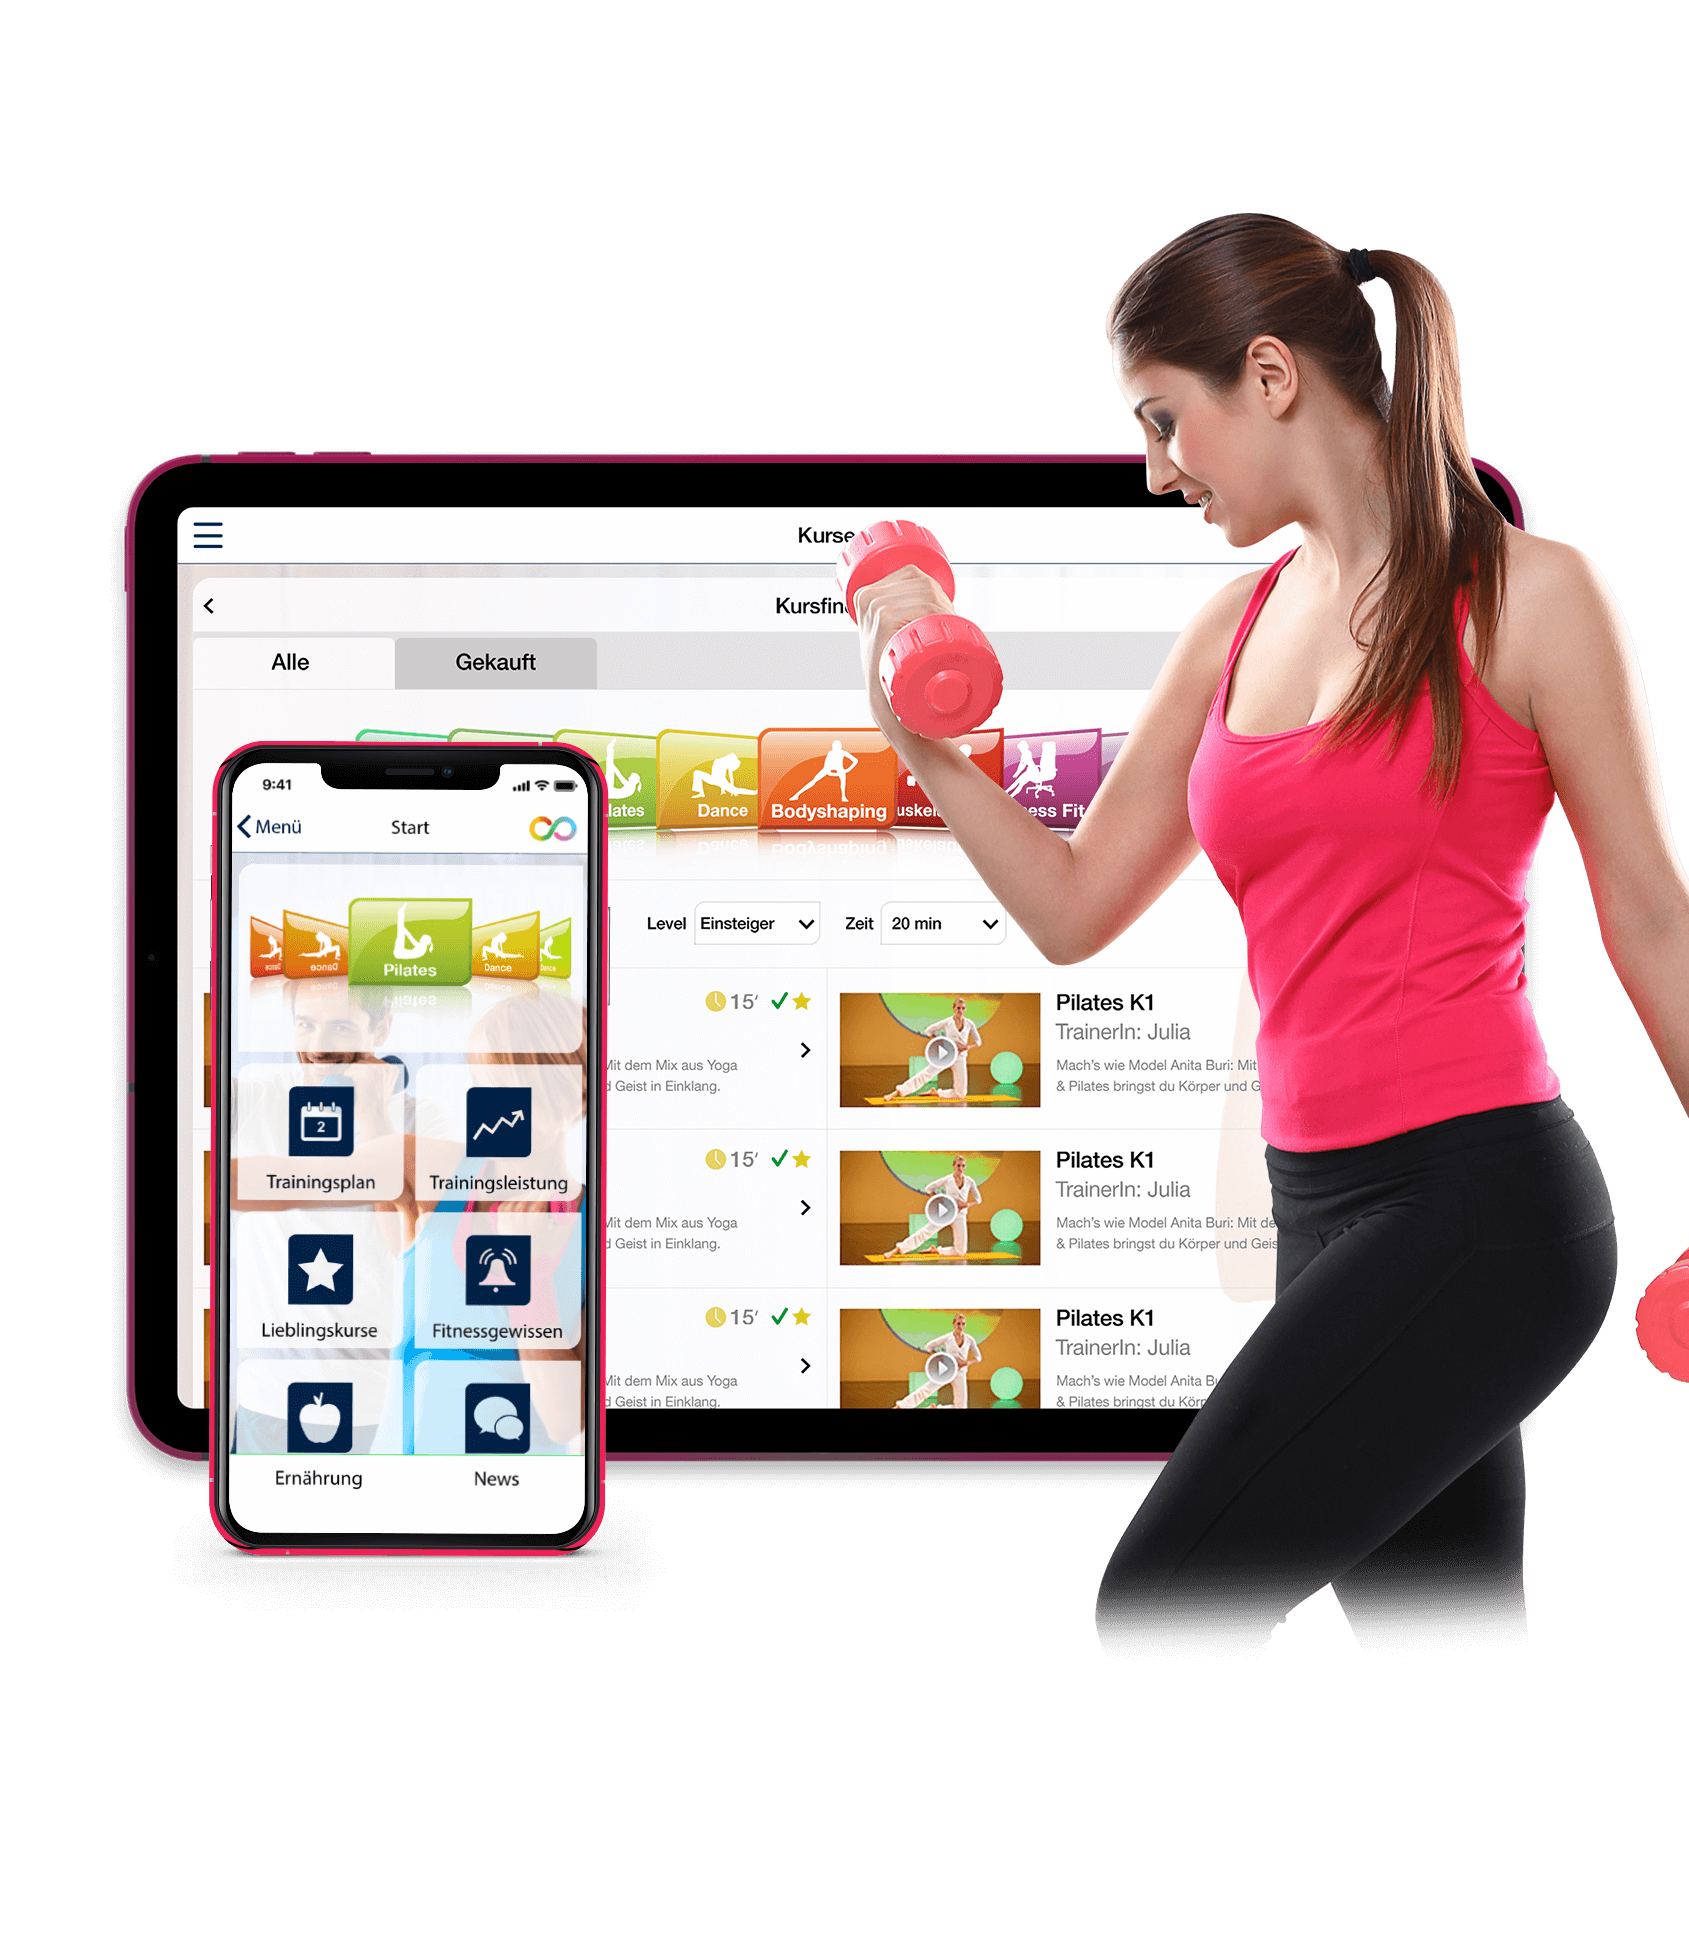 The application features 400 fitness HD video courses